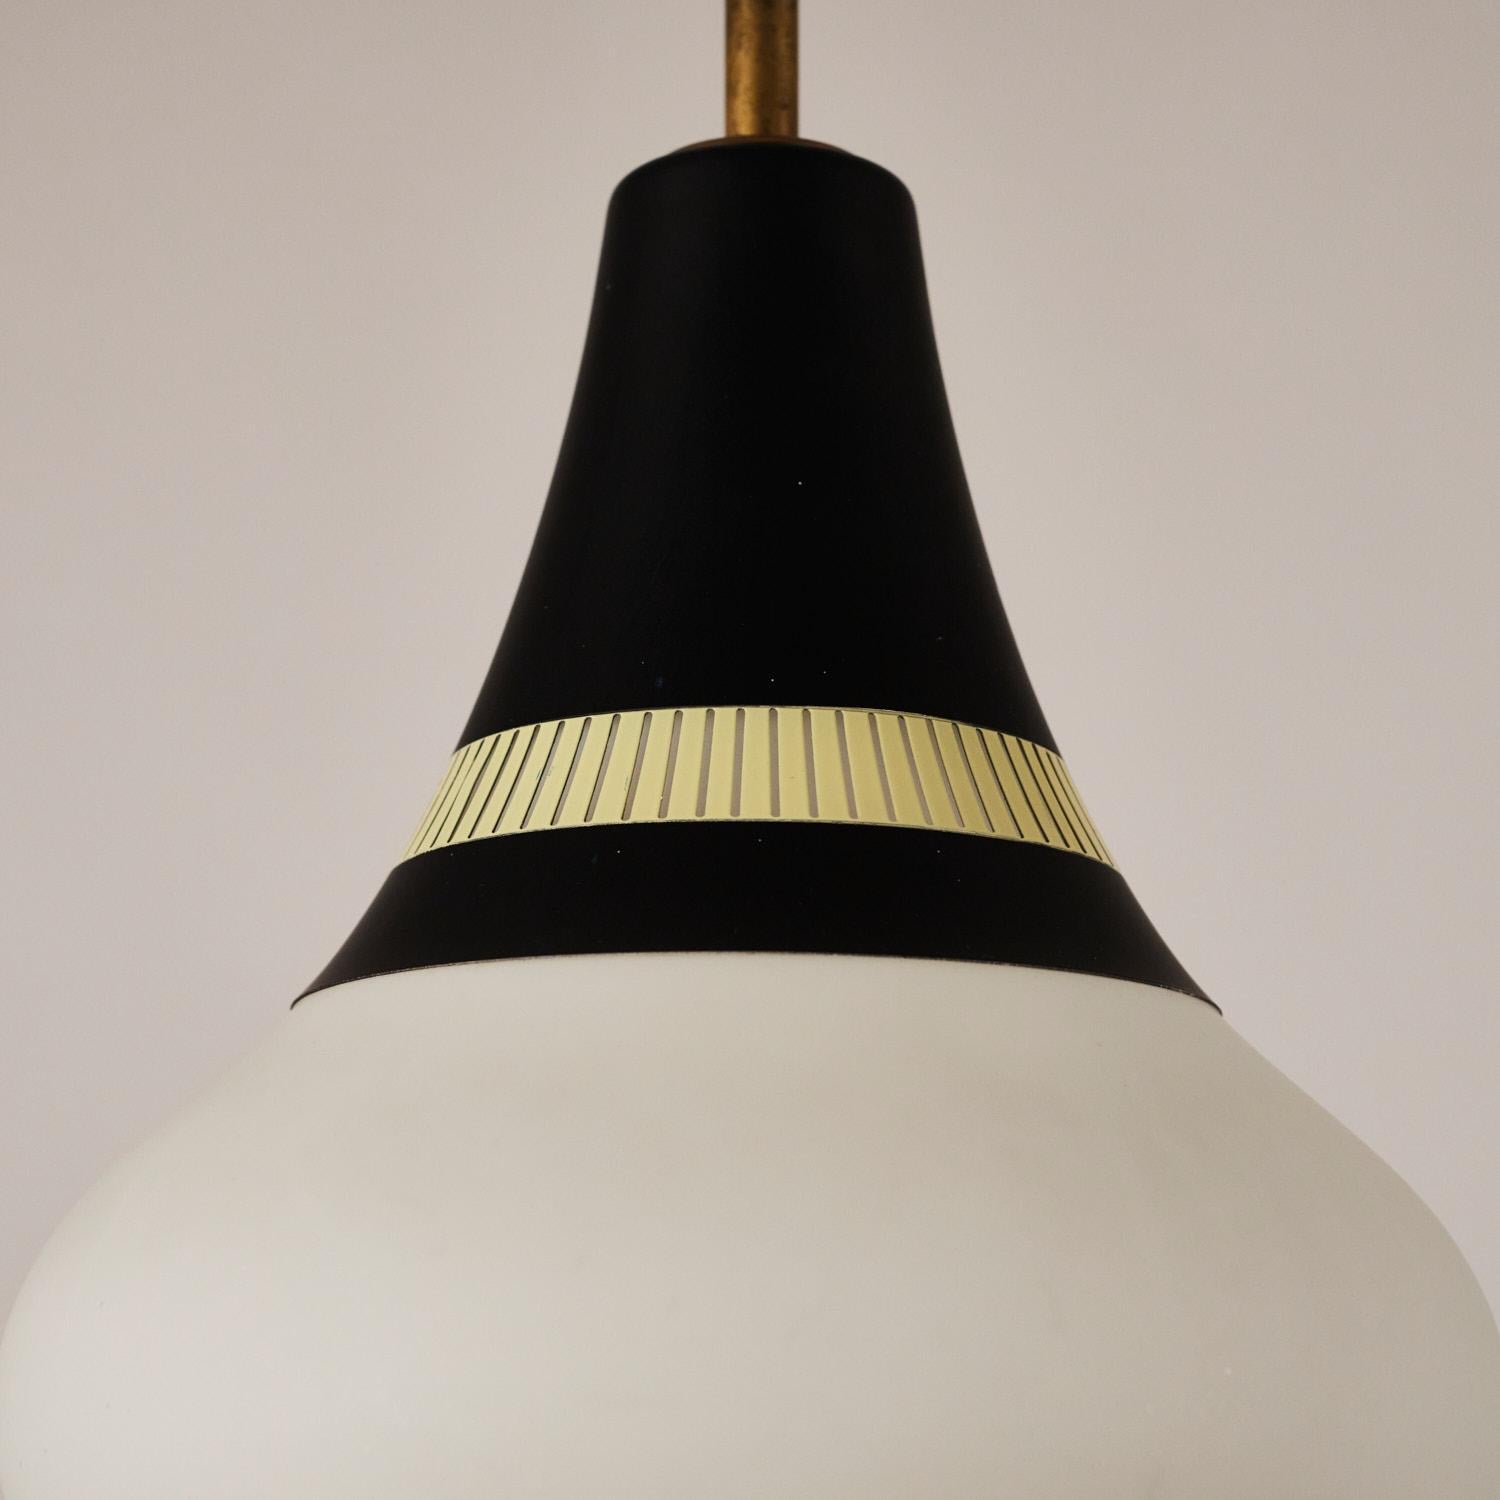 Original and rare white opaline glass pendant by Stilnovo, marked with manufacture label.